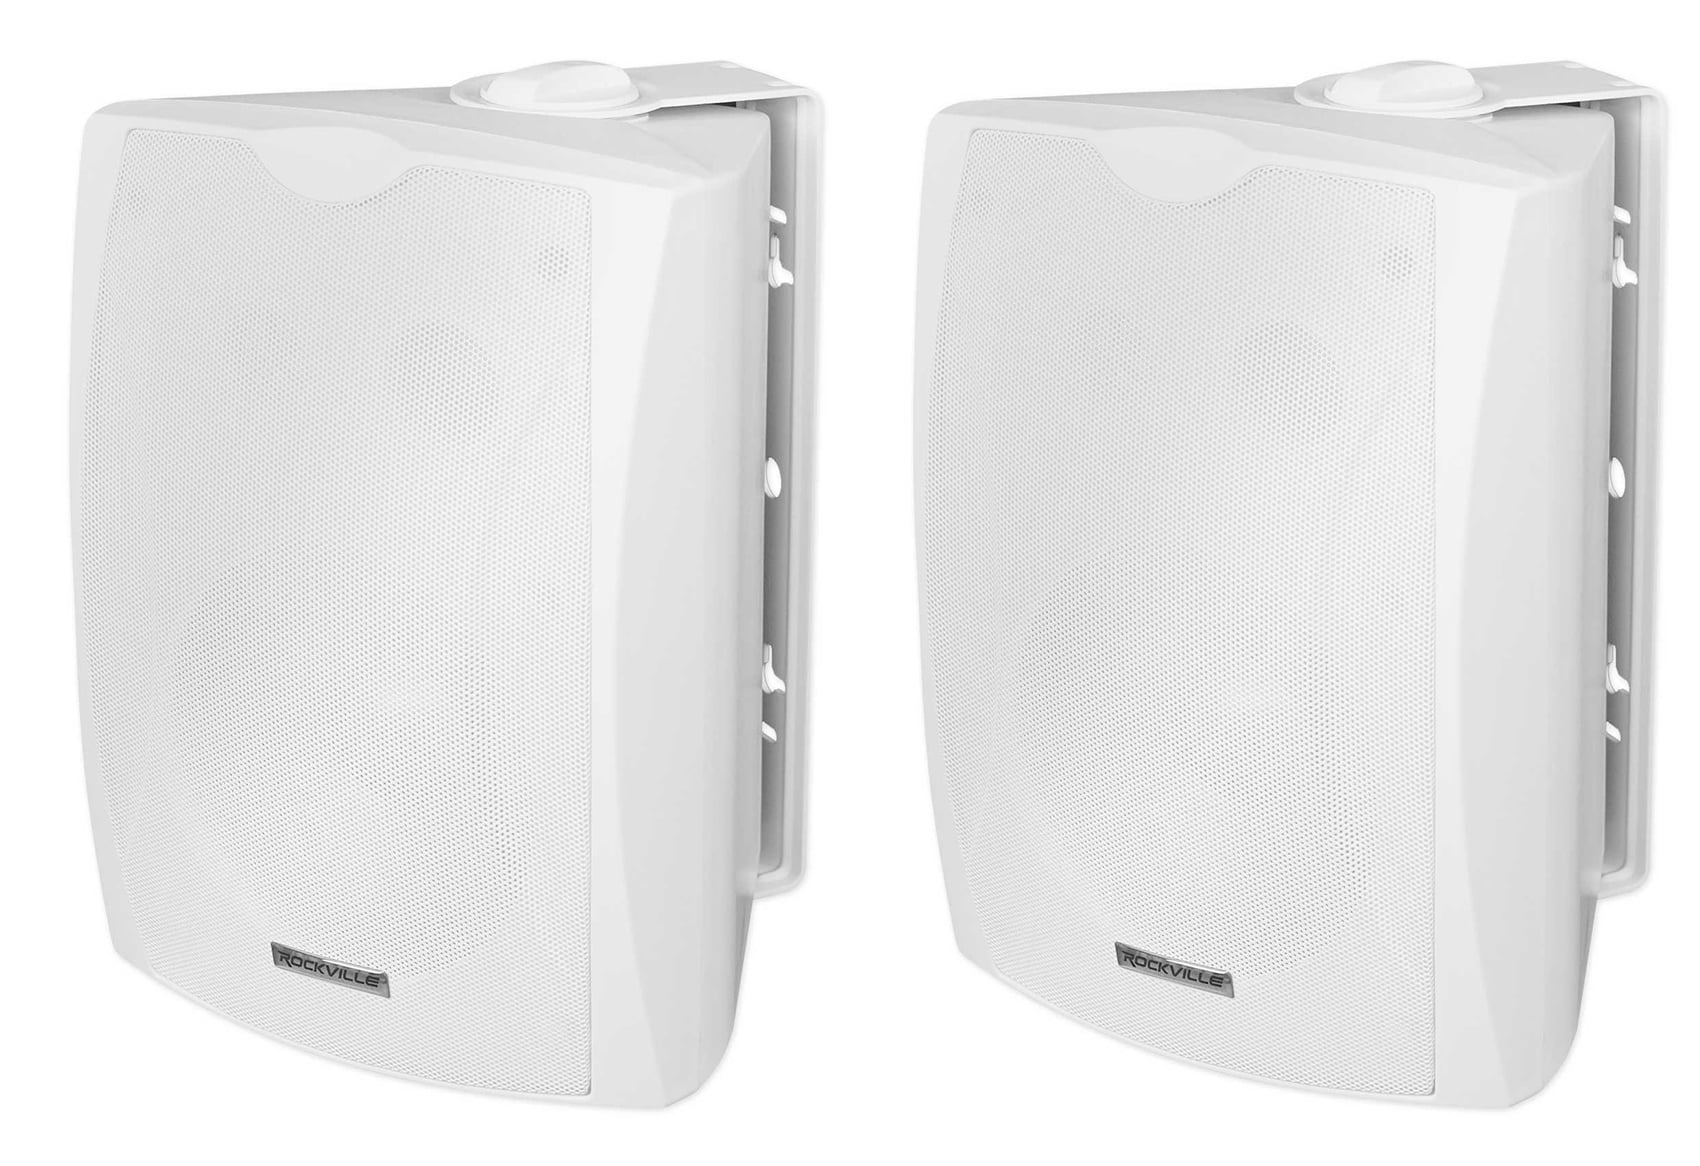 2 Rockville WET-6W 70V 6.5" IPX55 White Commercial Indoor/Outdoor Wall Speakers 